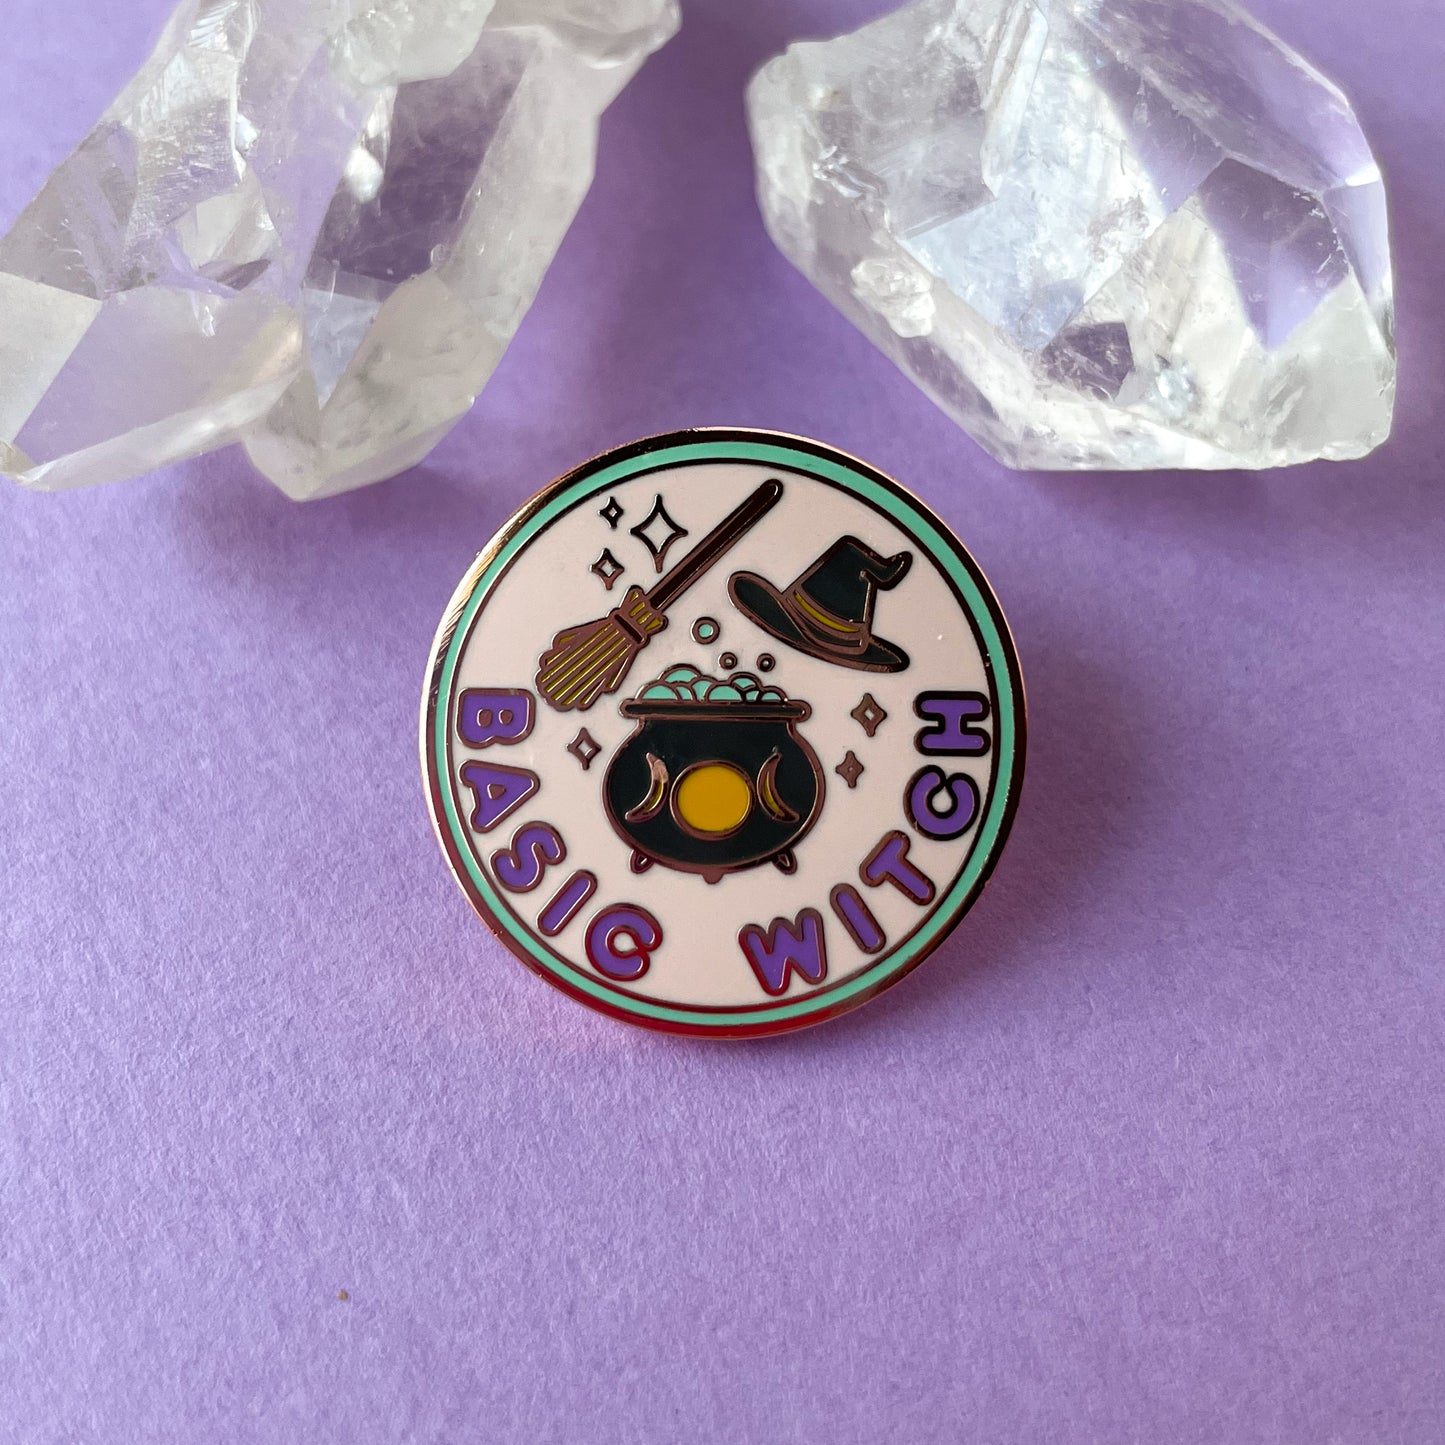 A circular hard enamel pin with rose gold metal. There is a mint green border around a pastel pink circle in the background. The bottom of the pin has bubble letters in purple that read "Basic Witch" above this there is a black cauldron with yellow moon phases full of bubbles. There is a broom above this and a black pointed hat to the right of the broom. Sparkles are around all of the objects. This pin is on a purple paper background with some quartz crystals in the background